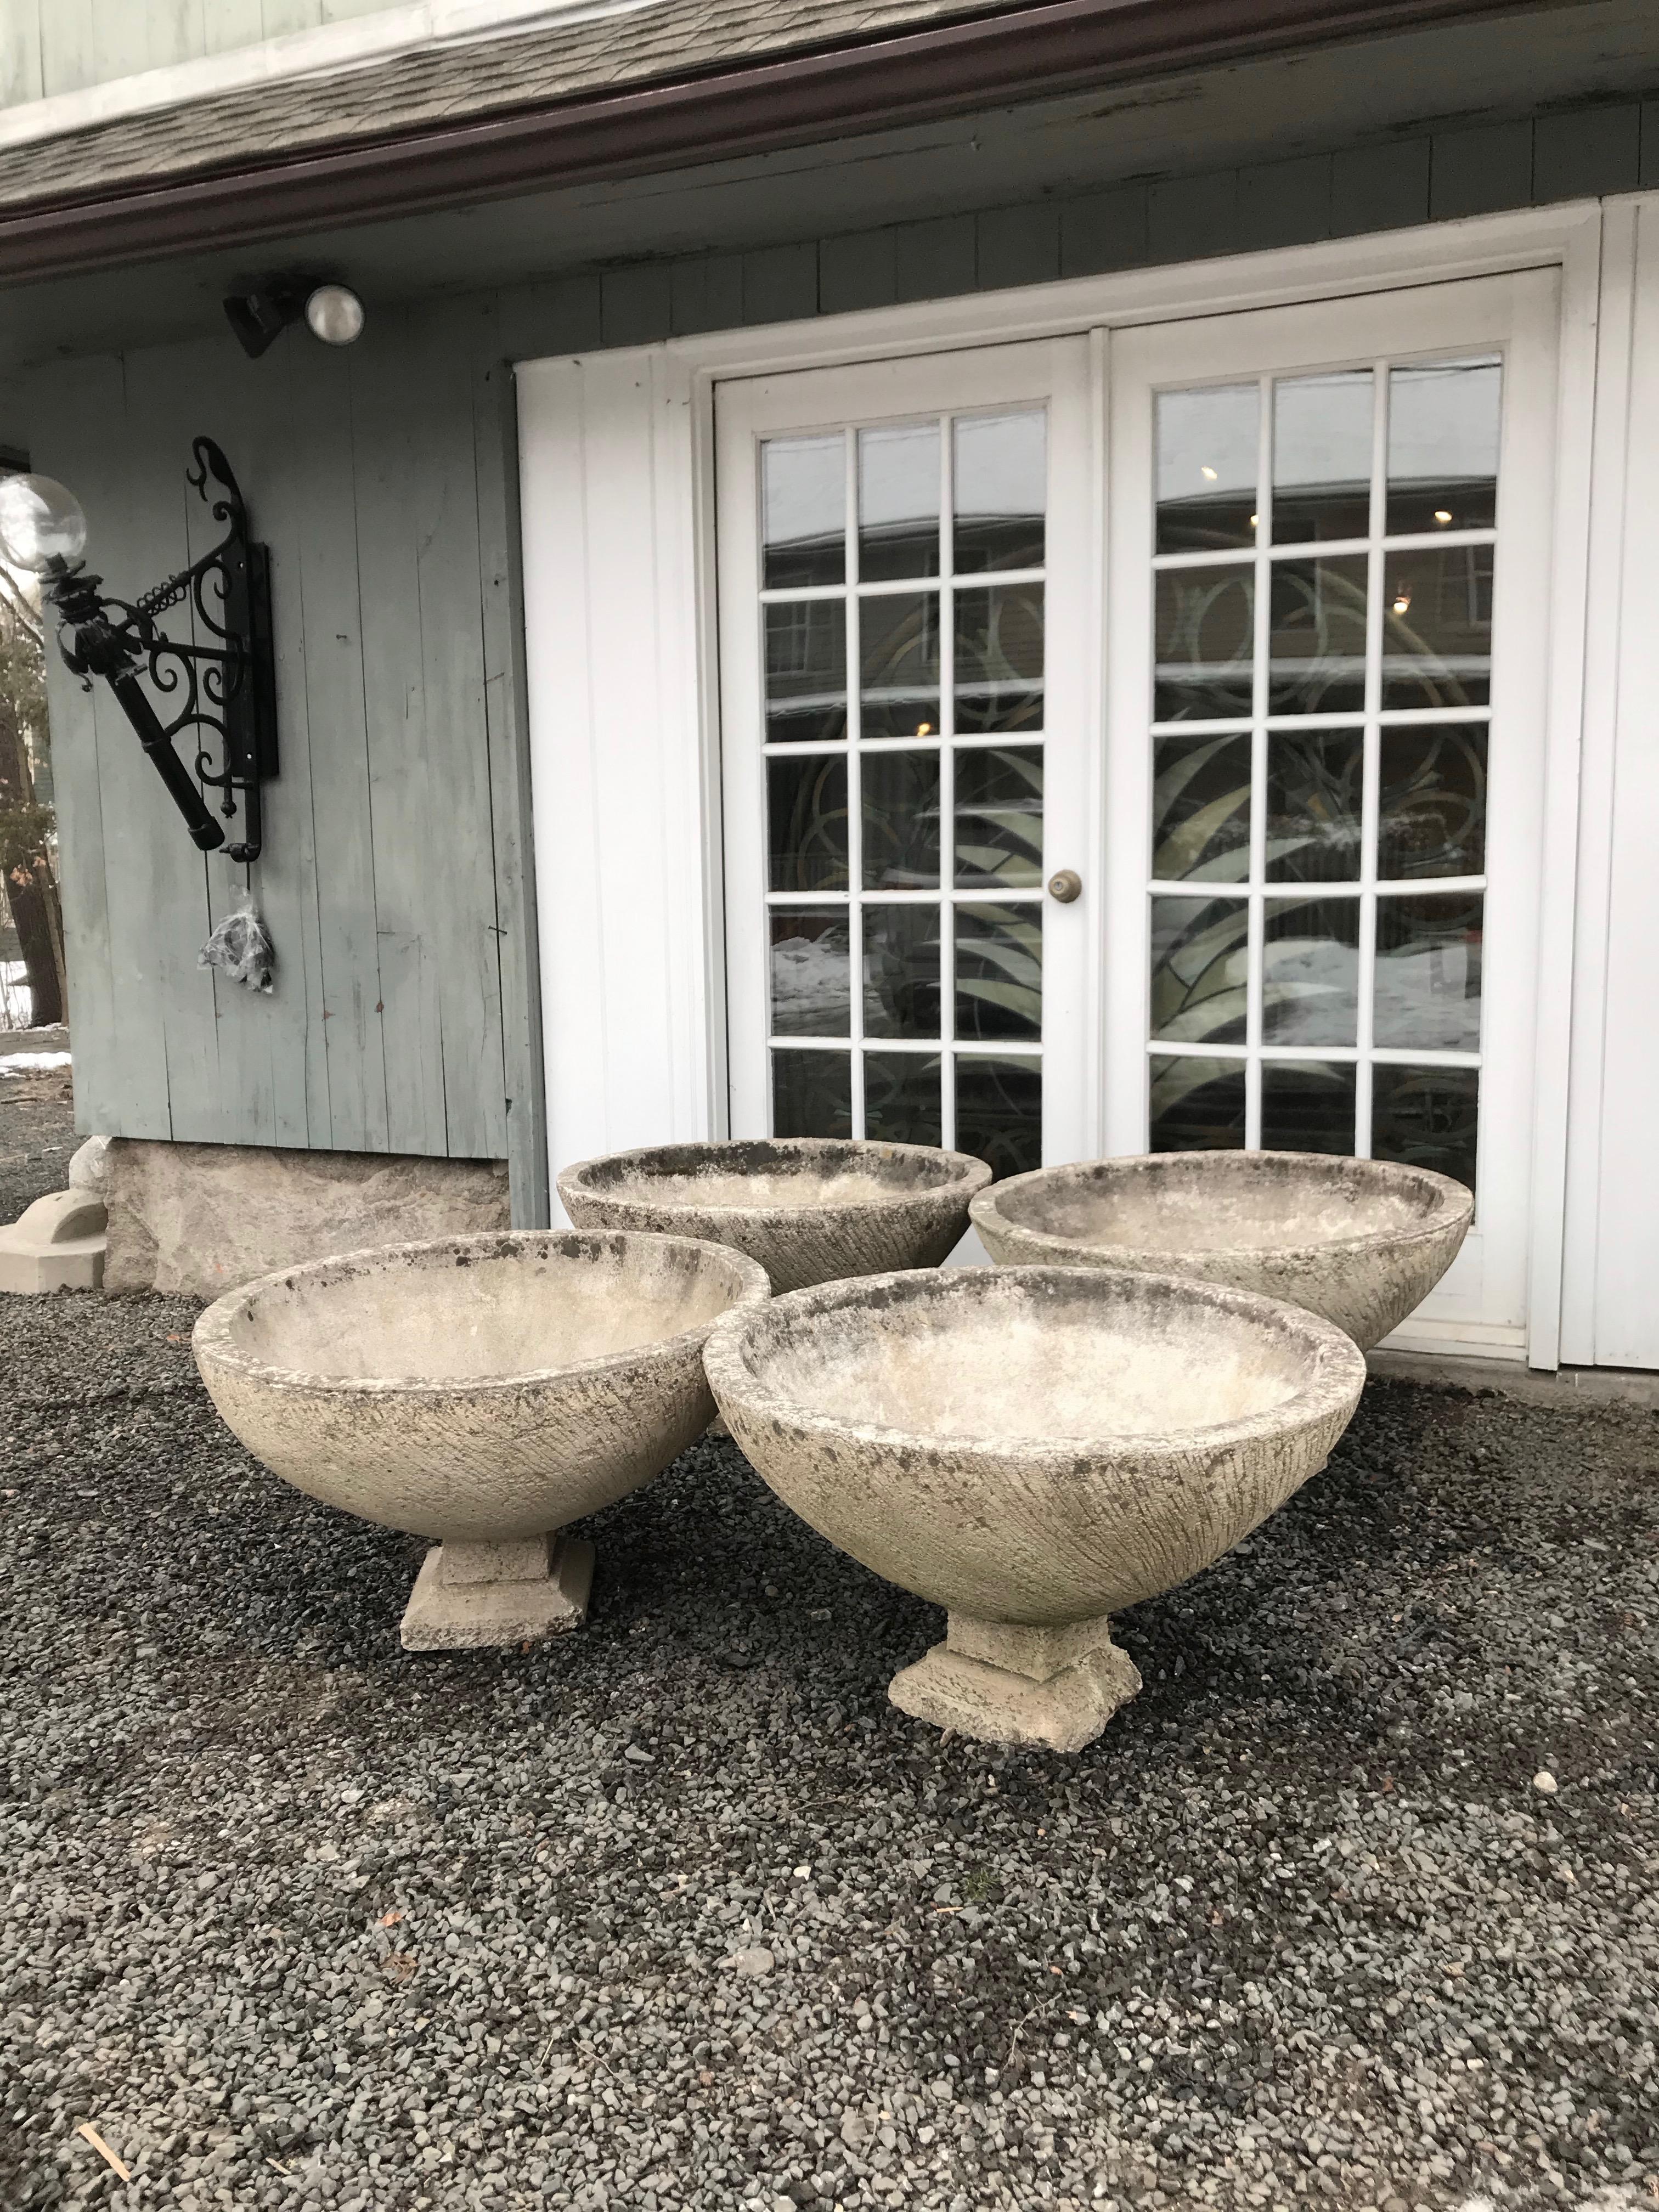 Pair of Large French Cast Stone Bowl Planters on Integral Feet #2 11